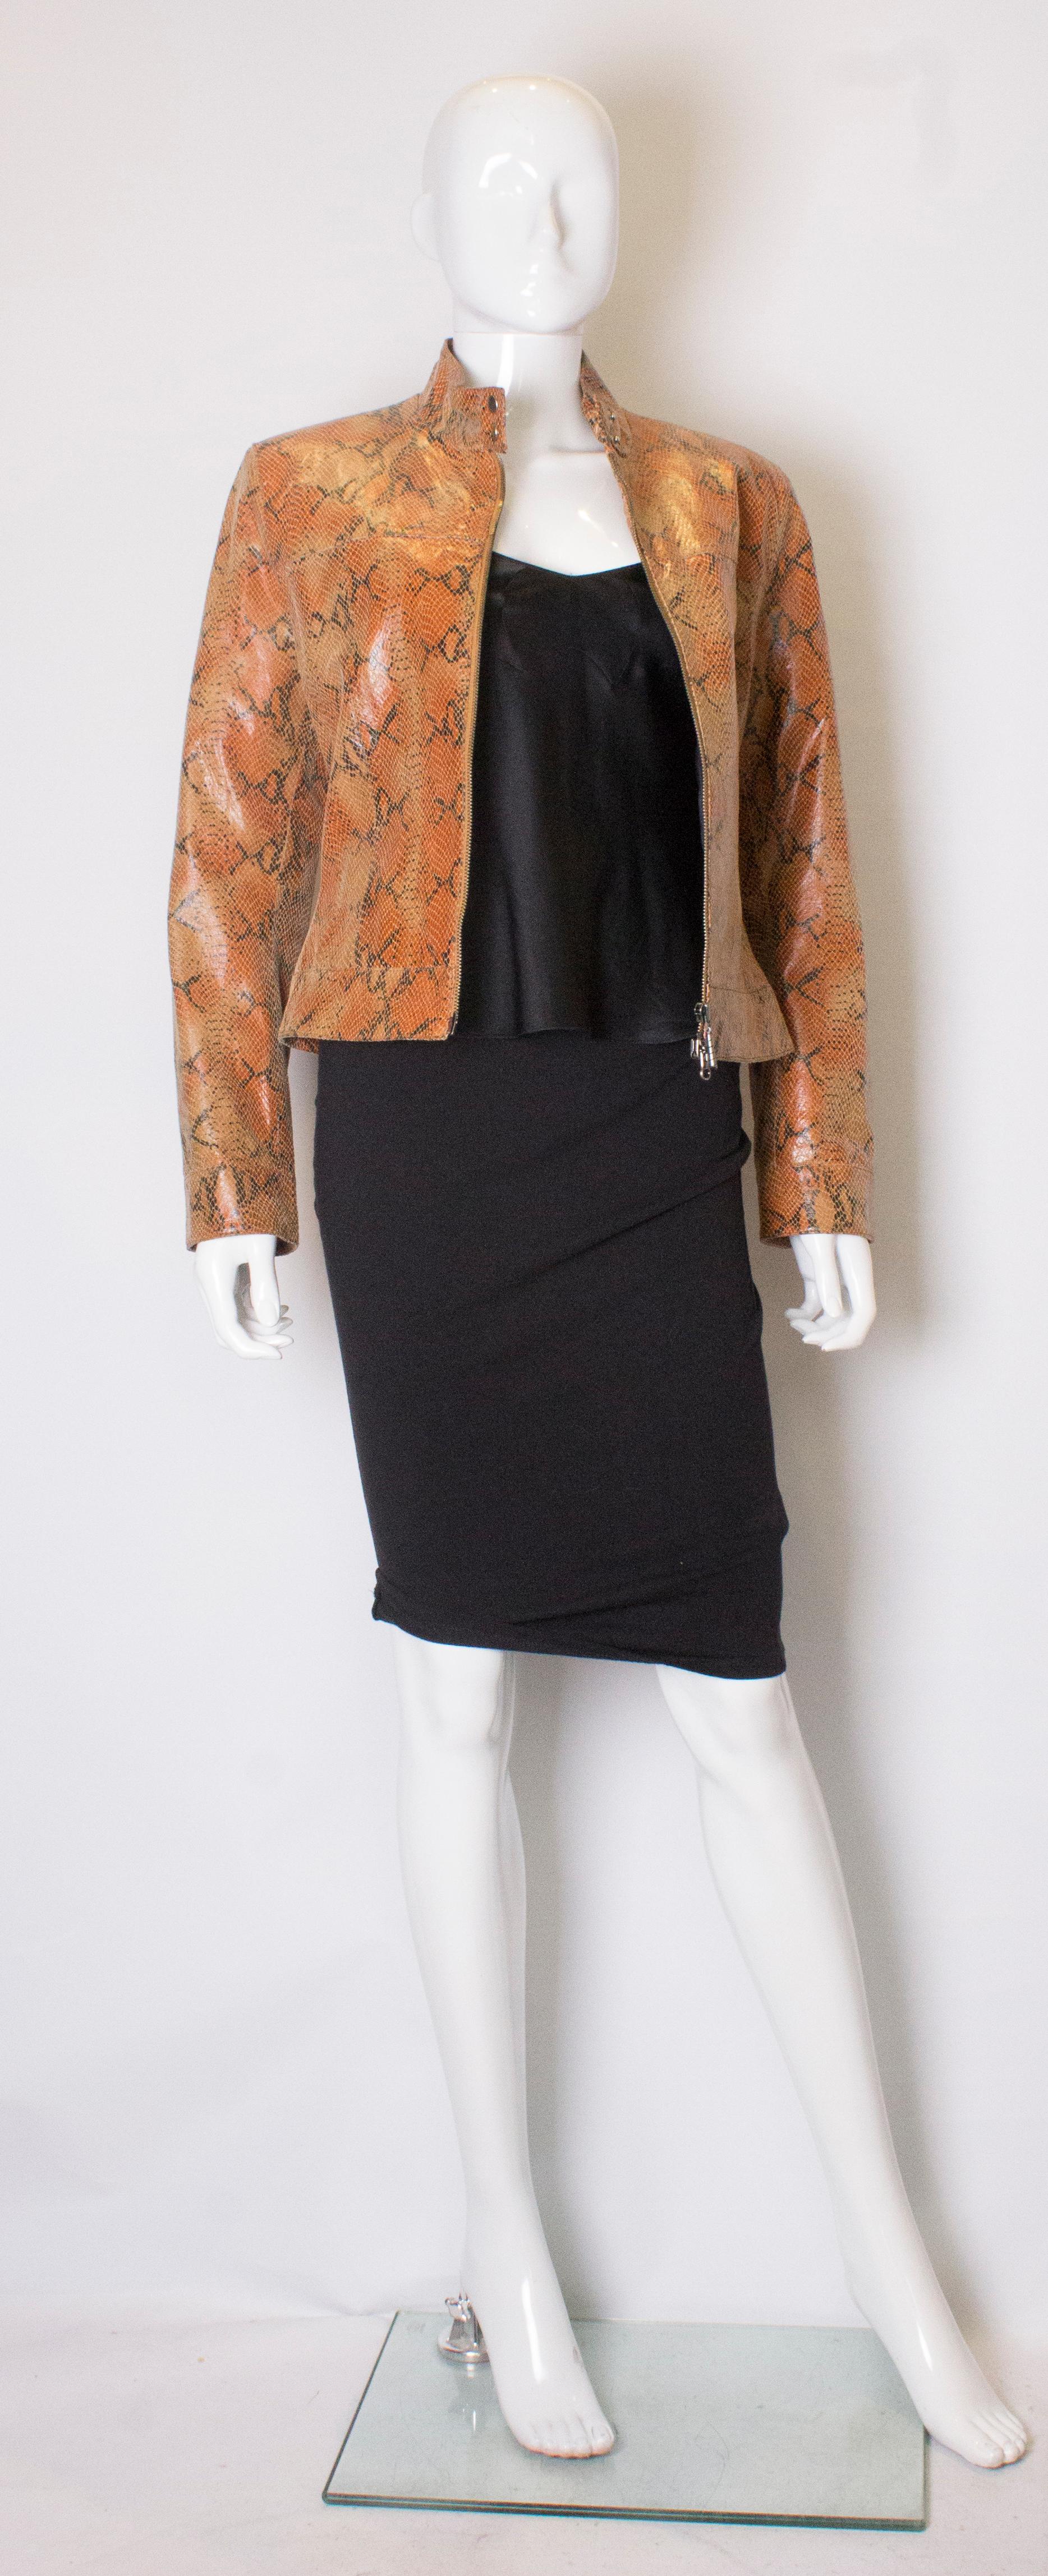 A great vintage snakeskin jacket , ideal for Spring. The jacket has 2 popper cuffs, and a 2 popper collar, with  a zip up front. It is fully lined.